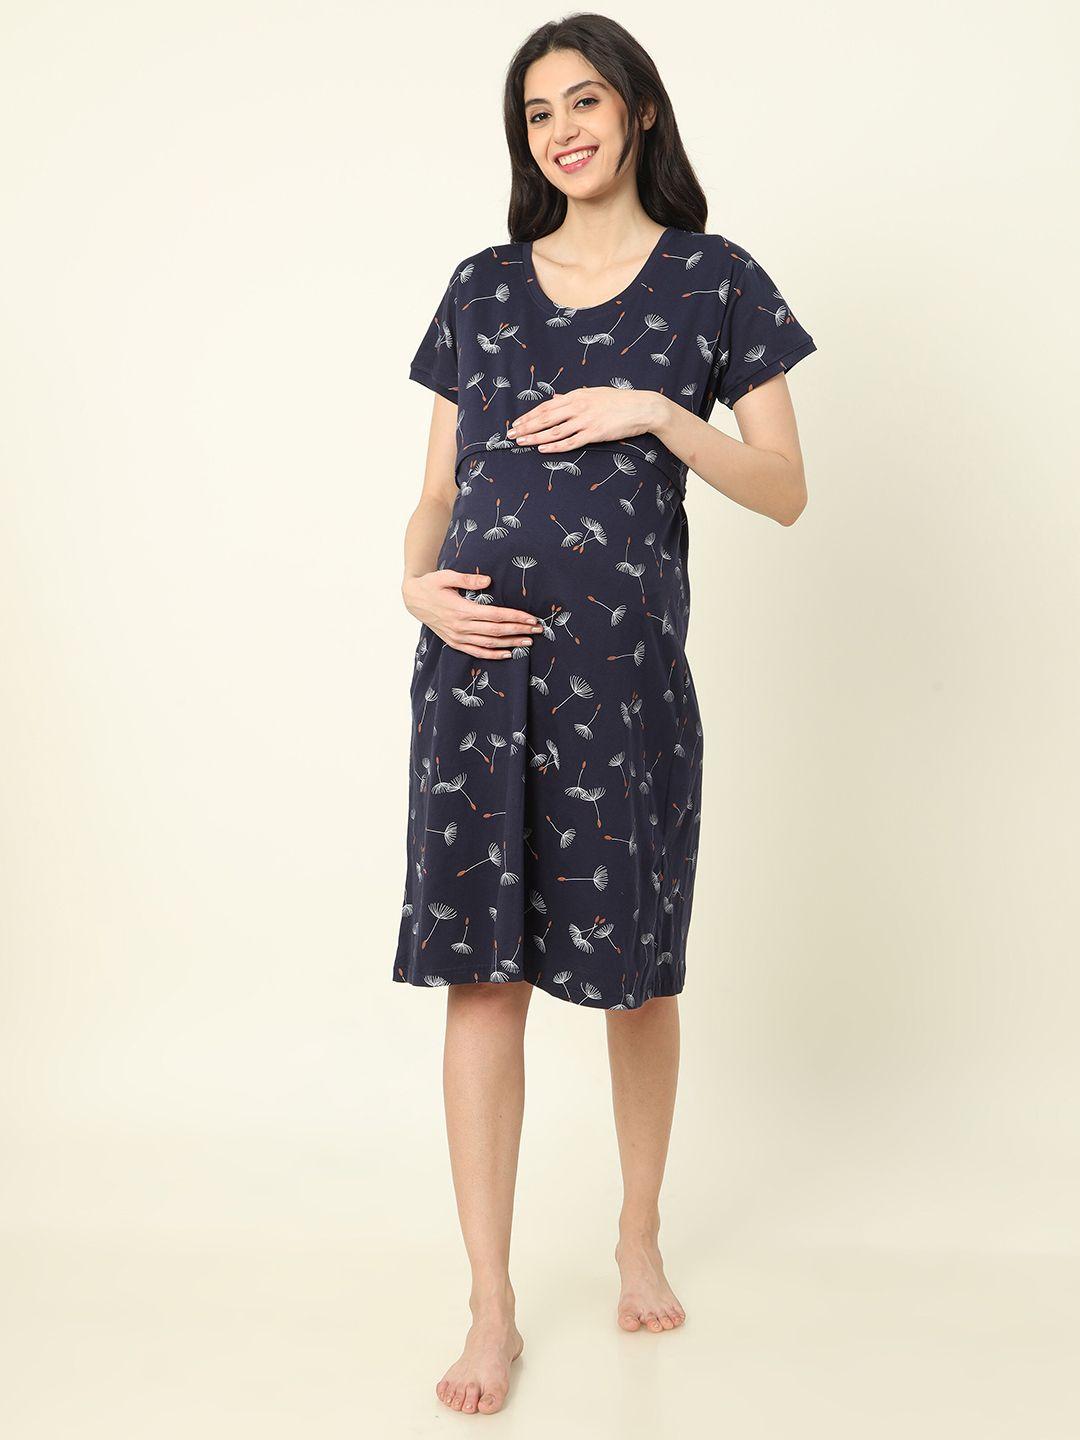 9shines-label-floral-printed-pure-cotton-maternity-nightdress